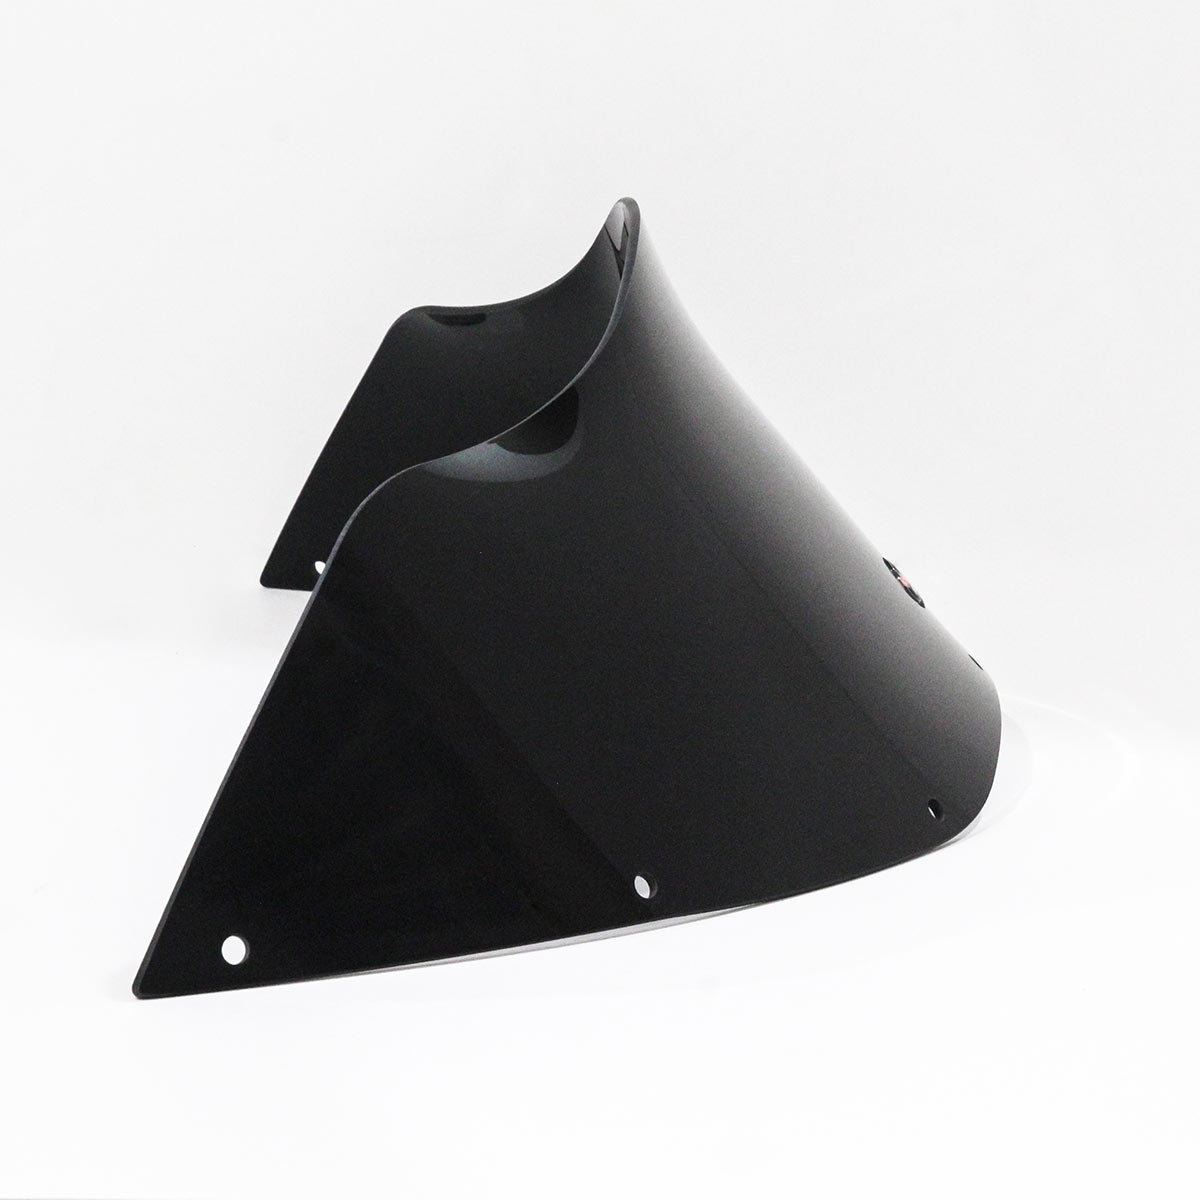 8" Solid Black Flare™ Windshield for Harley-Davidson motorcycles models with FXRP, FXRT, FXRD Style Fairings(8" Solid Black)